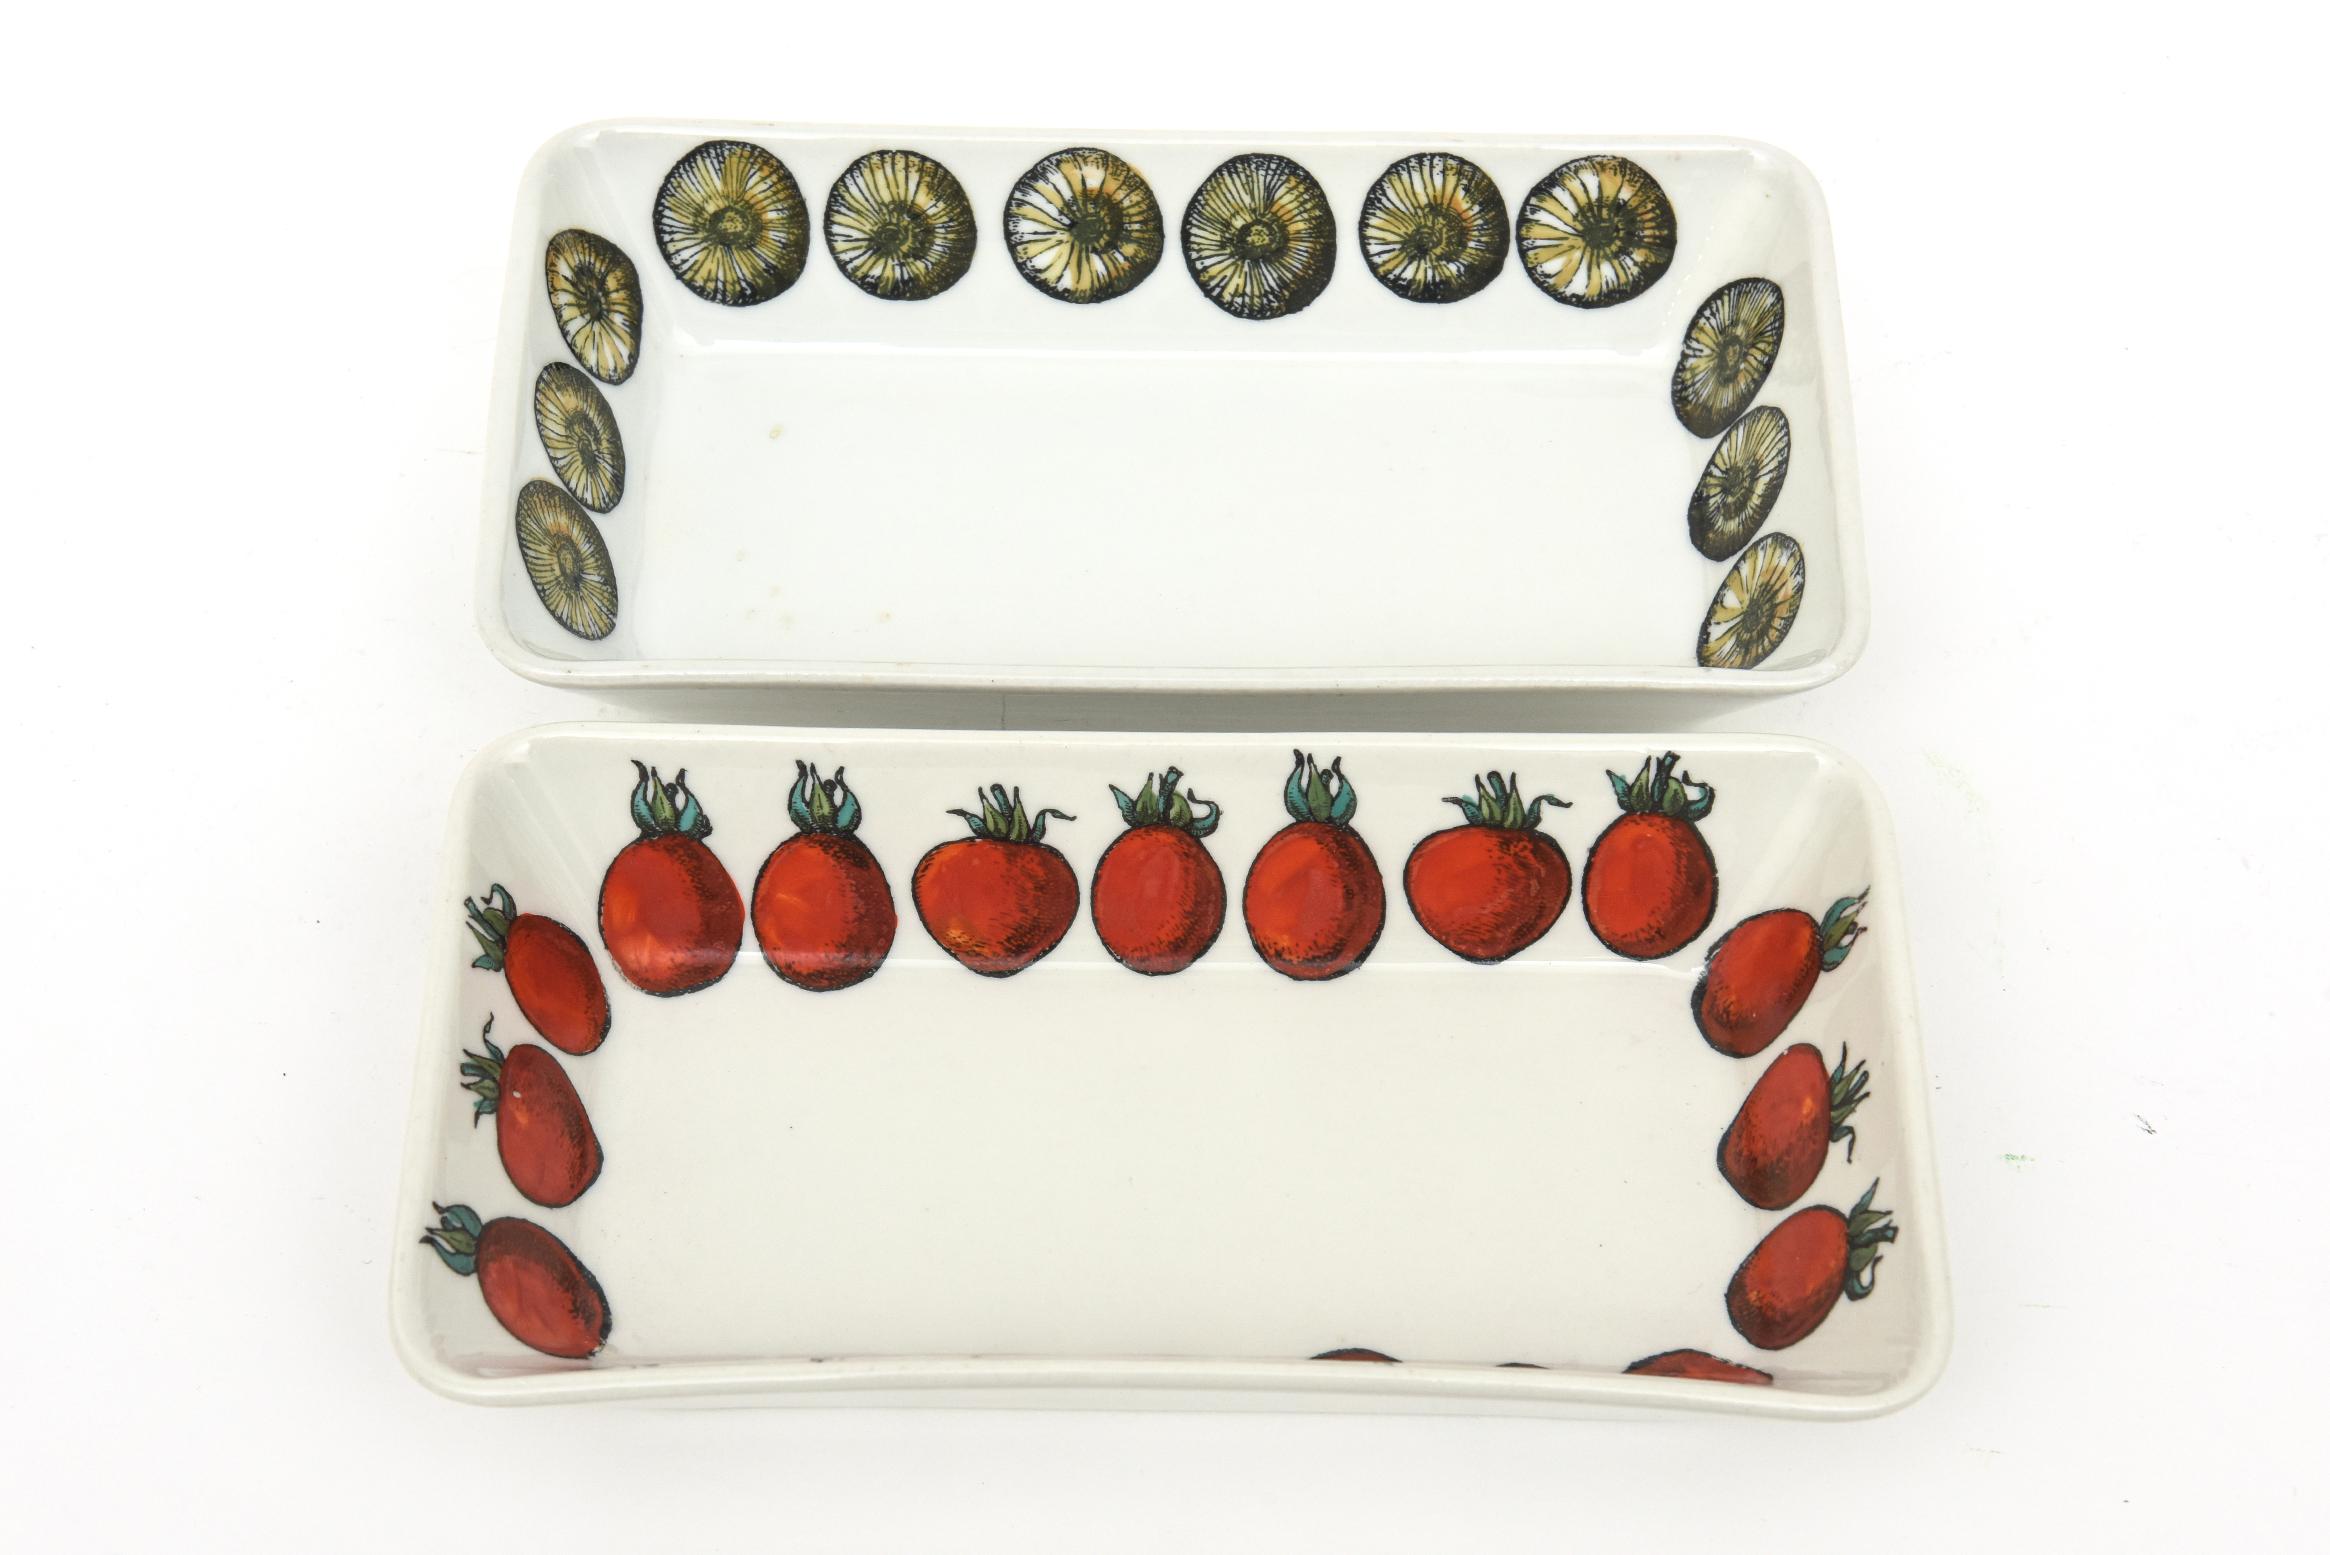 This pair of fabulous and hard to find vintage 1960's hallmarked Piero Fornasetti porcelain rectangular serving bowls, appetizer dishes have hand painted vegetables or fruits surrounding the inner perimeter. These are obscure, rare and most unusual.